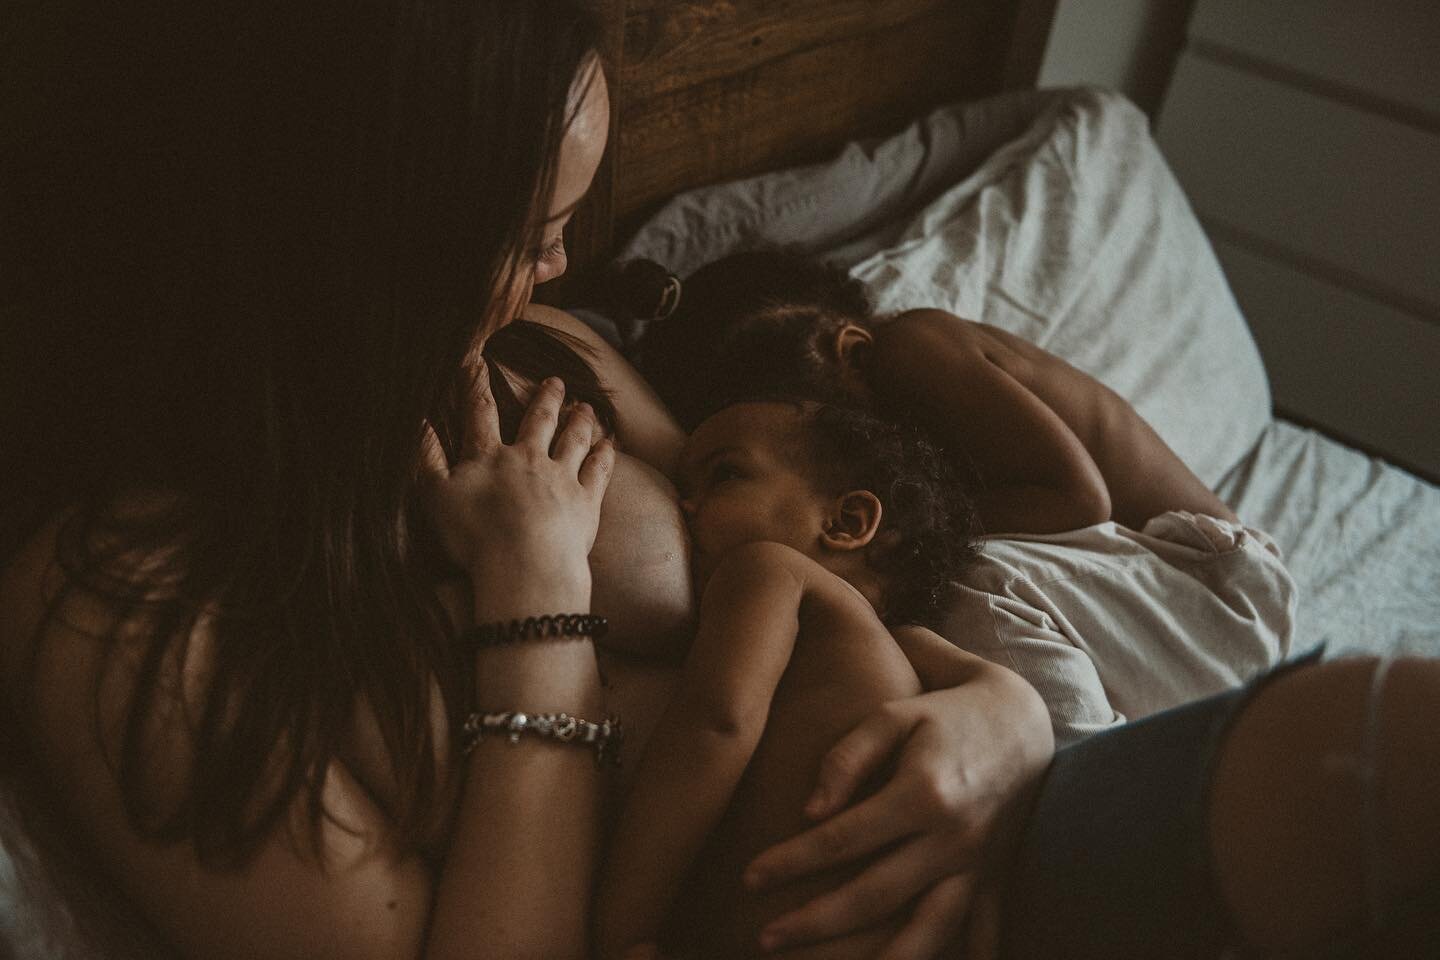 THE BREASTFEEDING DAYS
Breastfeeding is something very close to my heart.

This project is a personal one, my aim is to photograph and capture the connection between mothers and their babies from all over the world and from all different backgrounds.